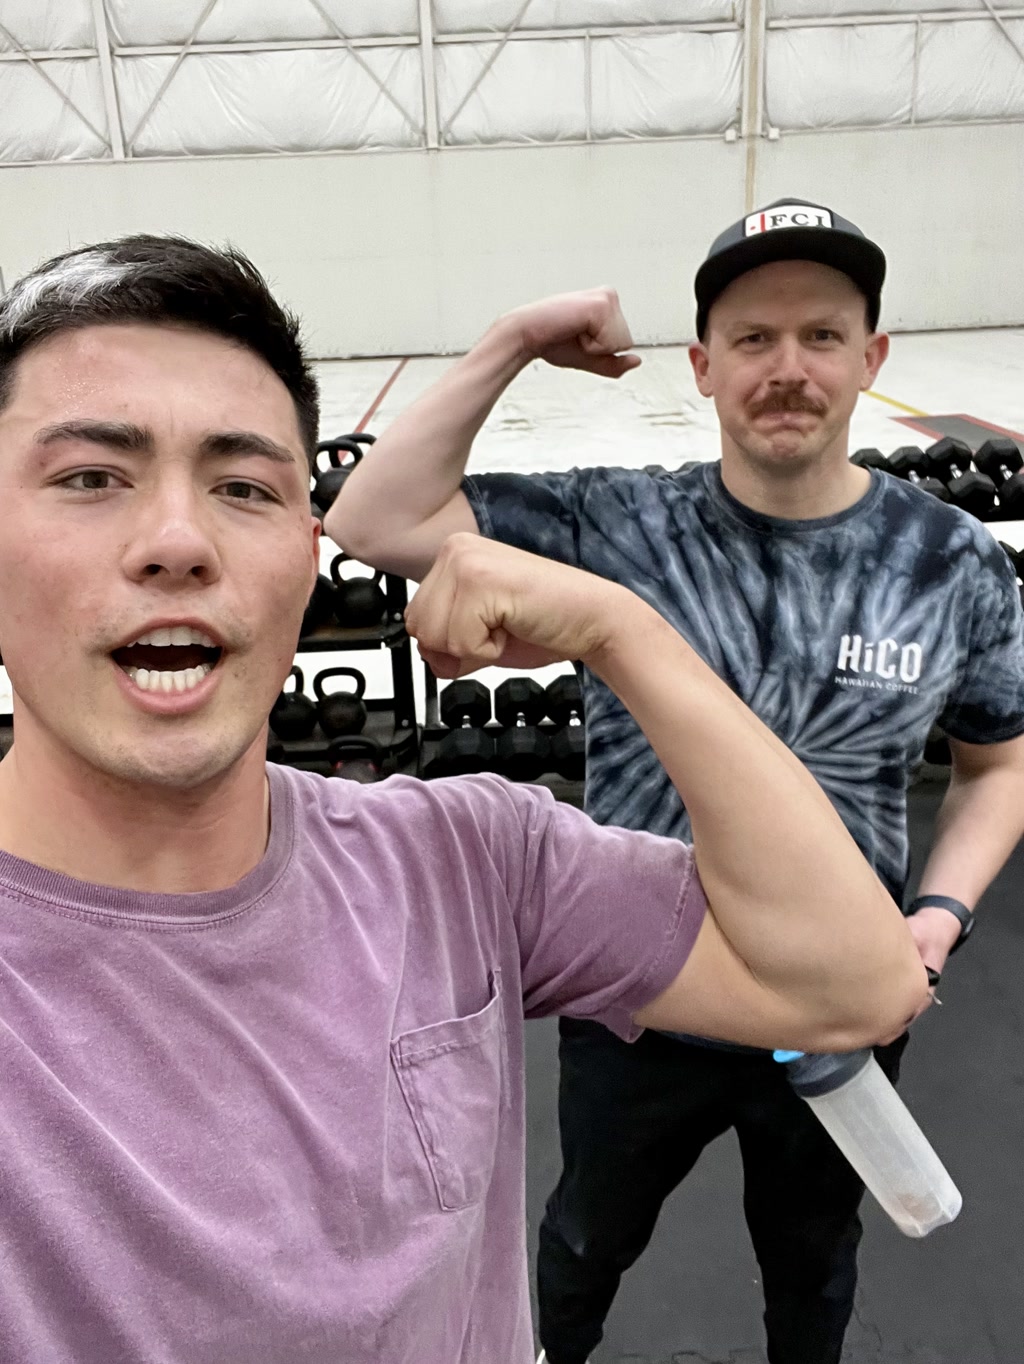 Two individuals, likely at a gym, are both flexing their arms to show off their muscles. The person in the foreground is seemingly taking a selfie with a smartphone; he is wearing a purple shirt with a small pocket and has a watch on his left wrist. The person in the background, wearing a black cap with a red and white logo and a dark tie-dye t-shirt with the letters 'H.CO' printed on it, is also flexing but with a more reserved expression. There's a rack of dumbbells visible behind them.